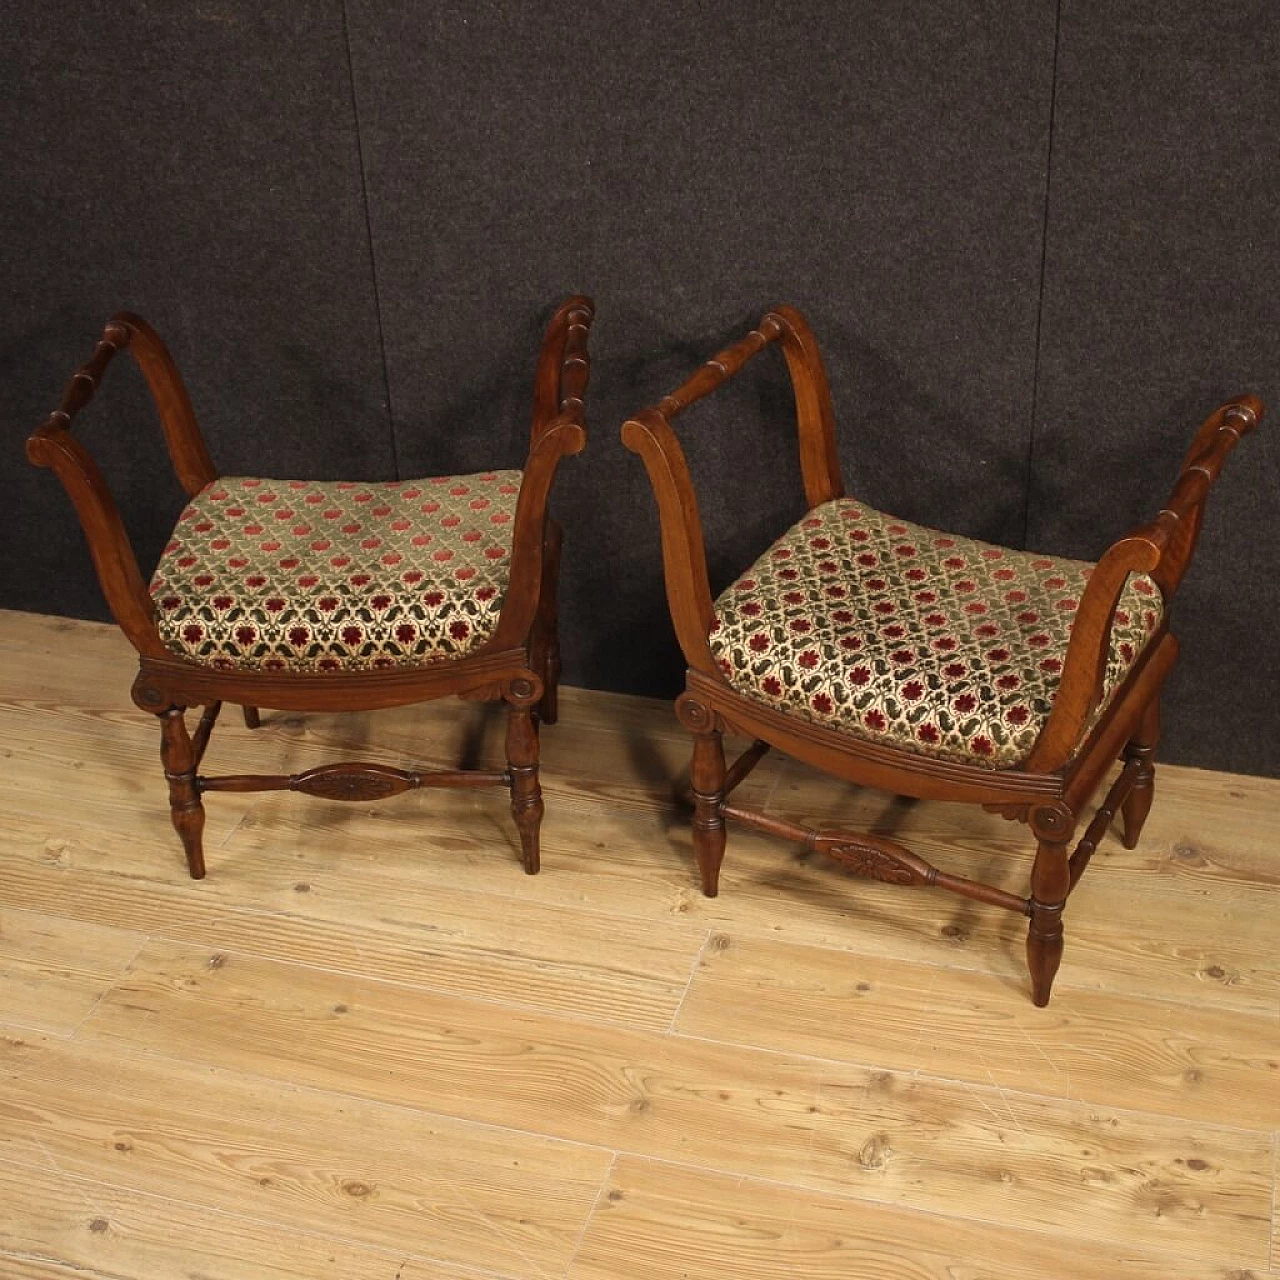 Pair of Charles X benches in carved walnut and floral fabric, 19th century 1116098